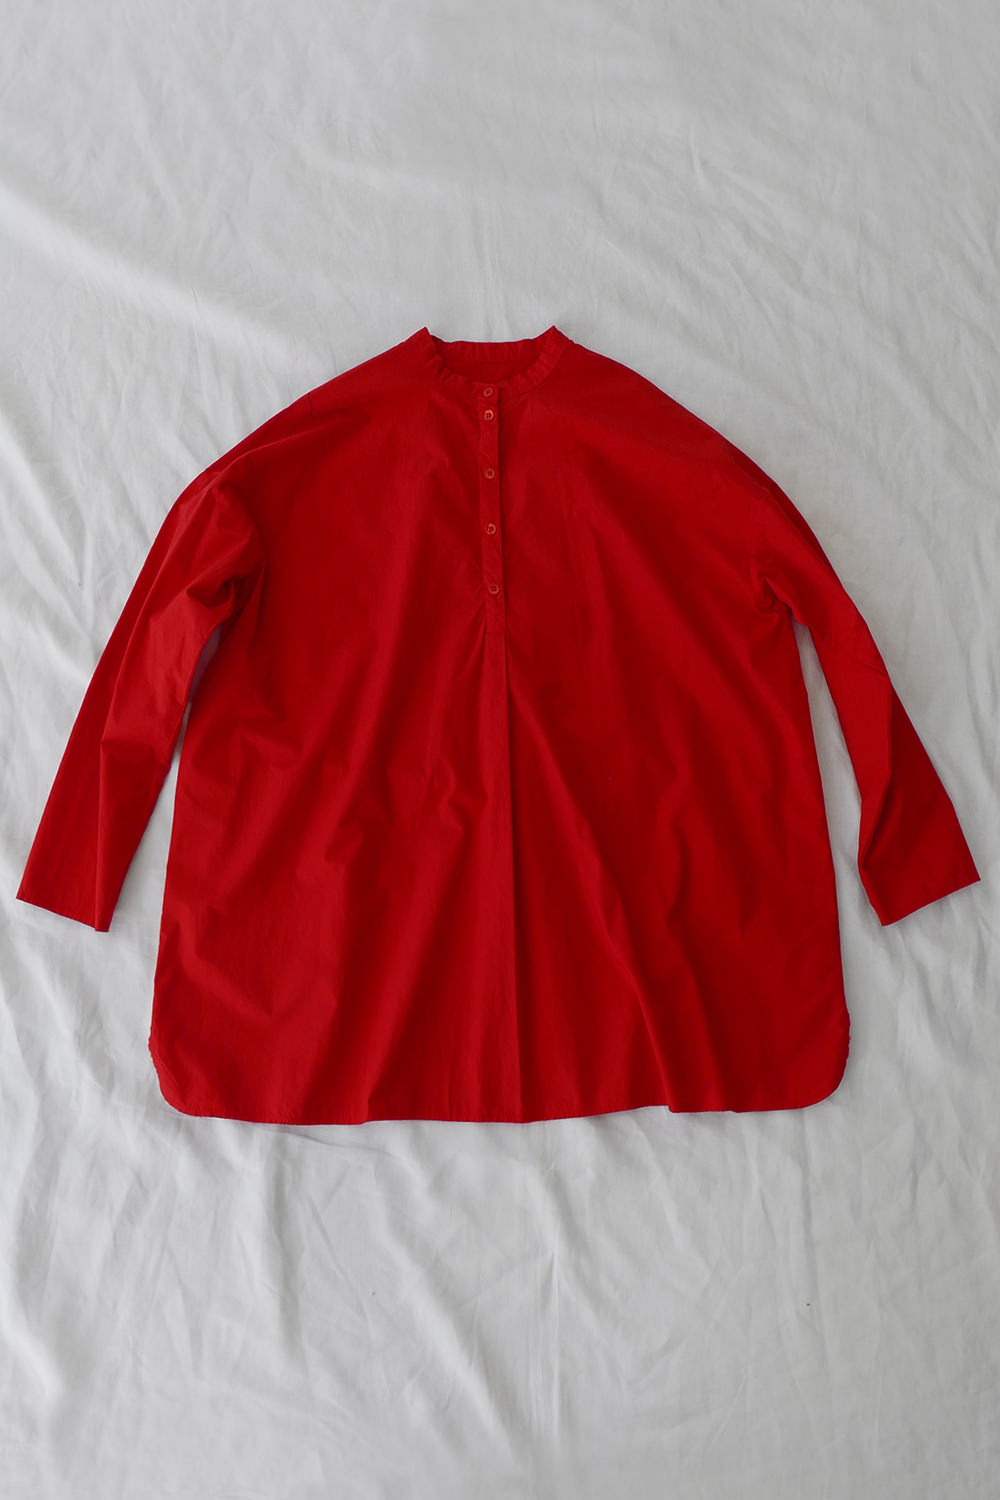 Manuelle Guibal Cotton Shirt Red Top Picture